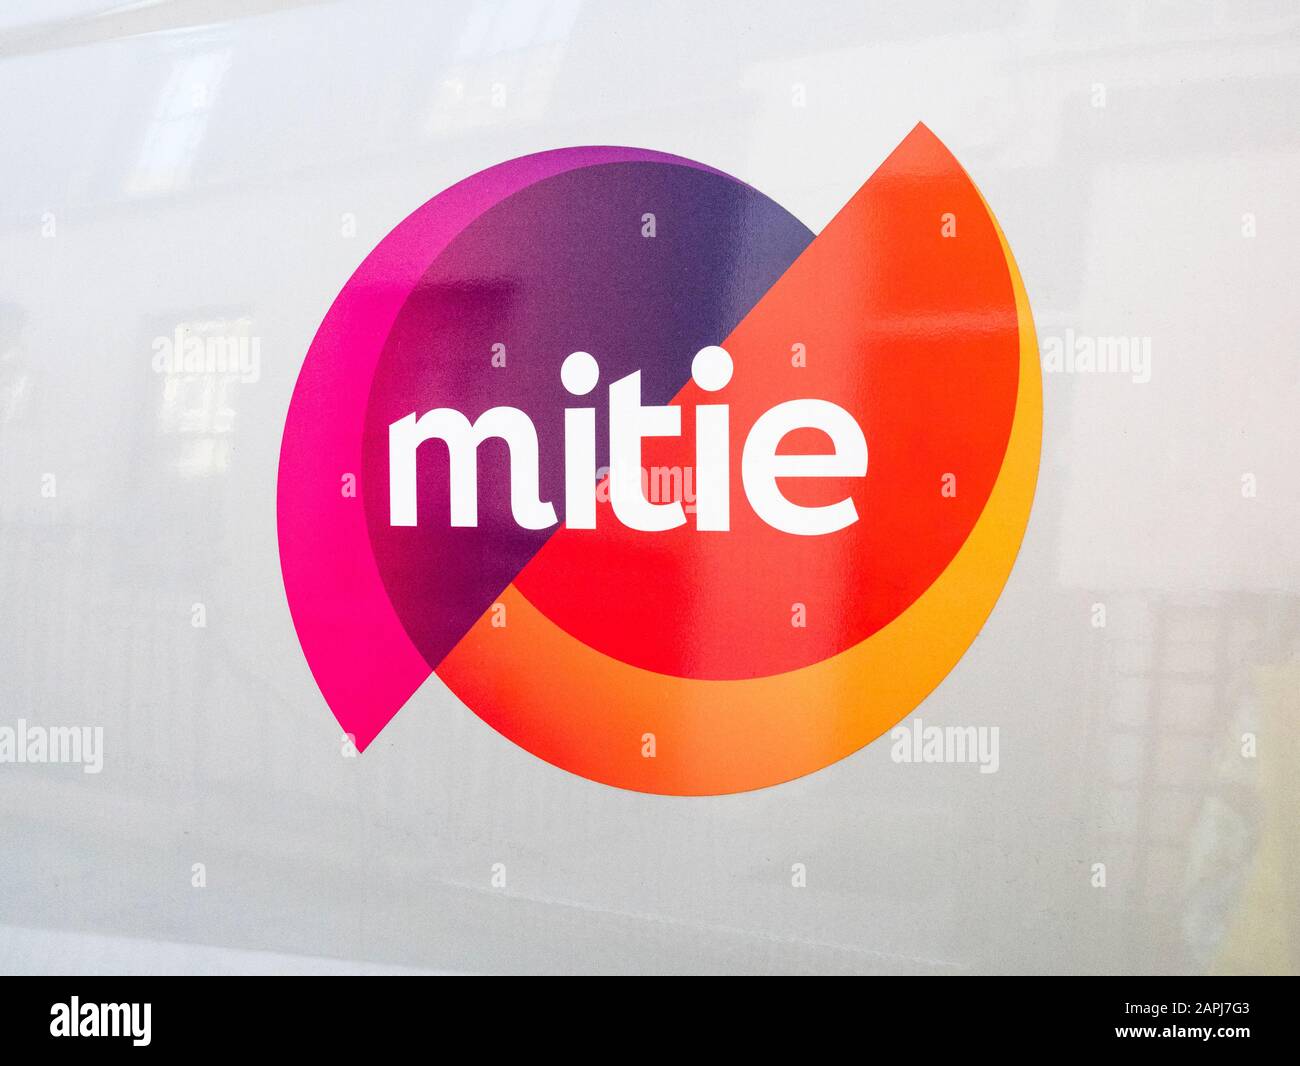 Branding logo of MITIE group on the side of a company vehicle in Central London (Jan 2020). MITIE is a UK facilities management outsourcing company. Stock Photo